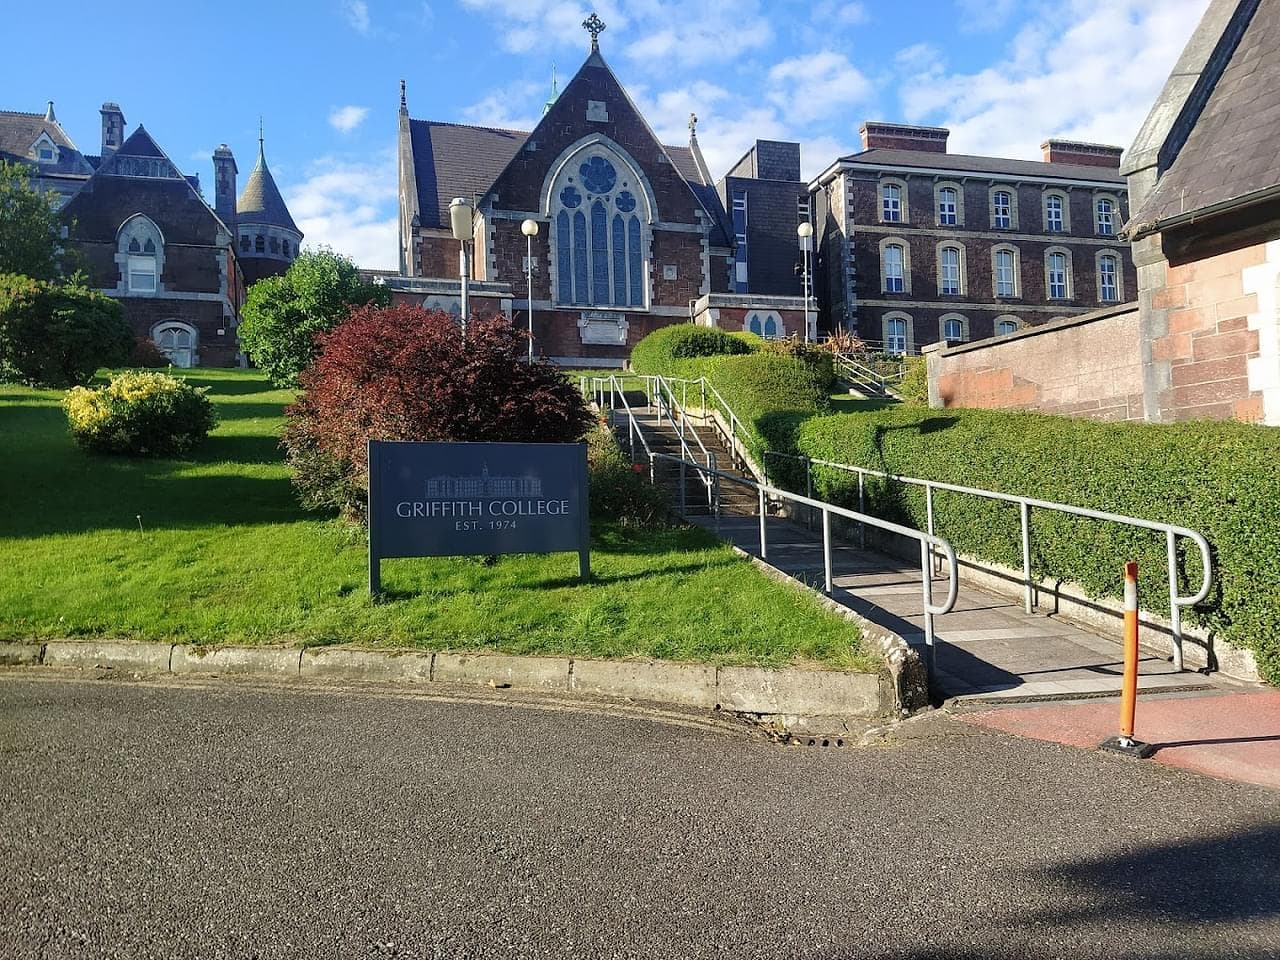 Griffith College Ireland Cork Featured Image